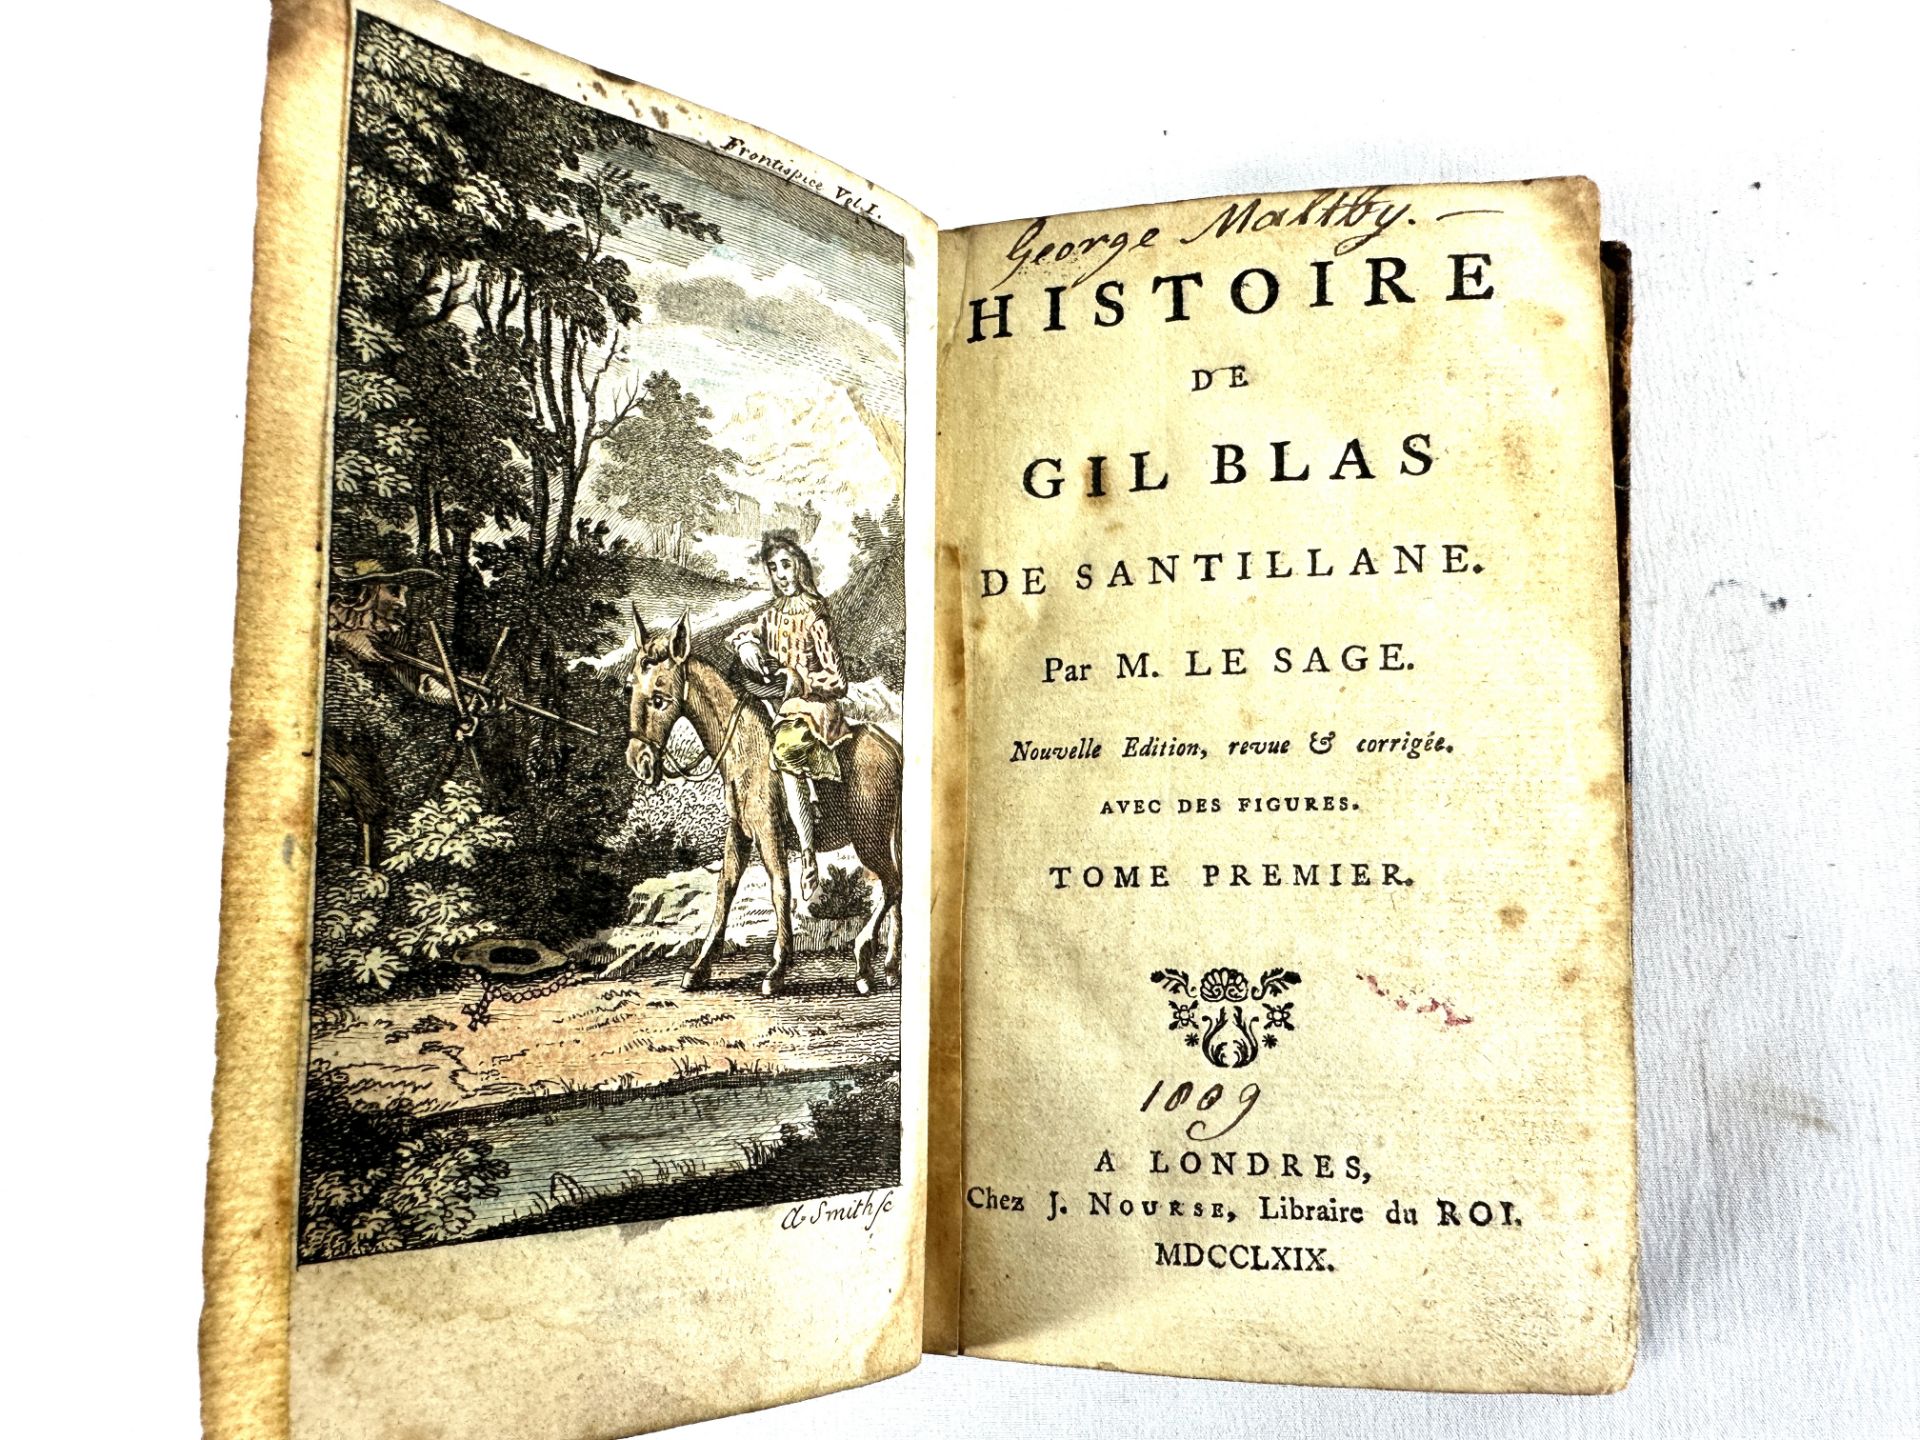 Histoire de Gil Blas by M. Le Sage, volume one, published in French 1769 - Image 3 of 3